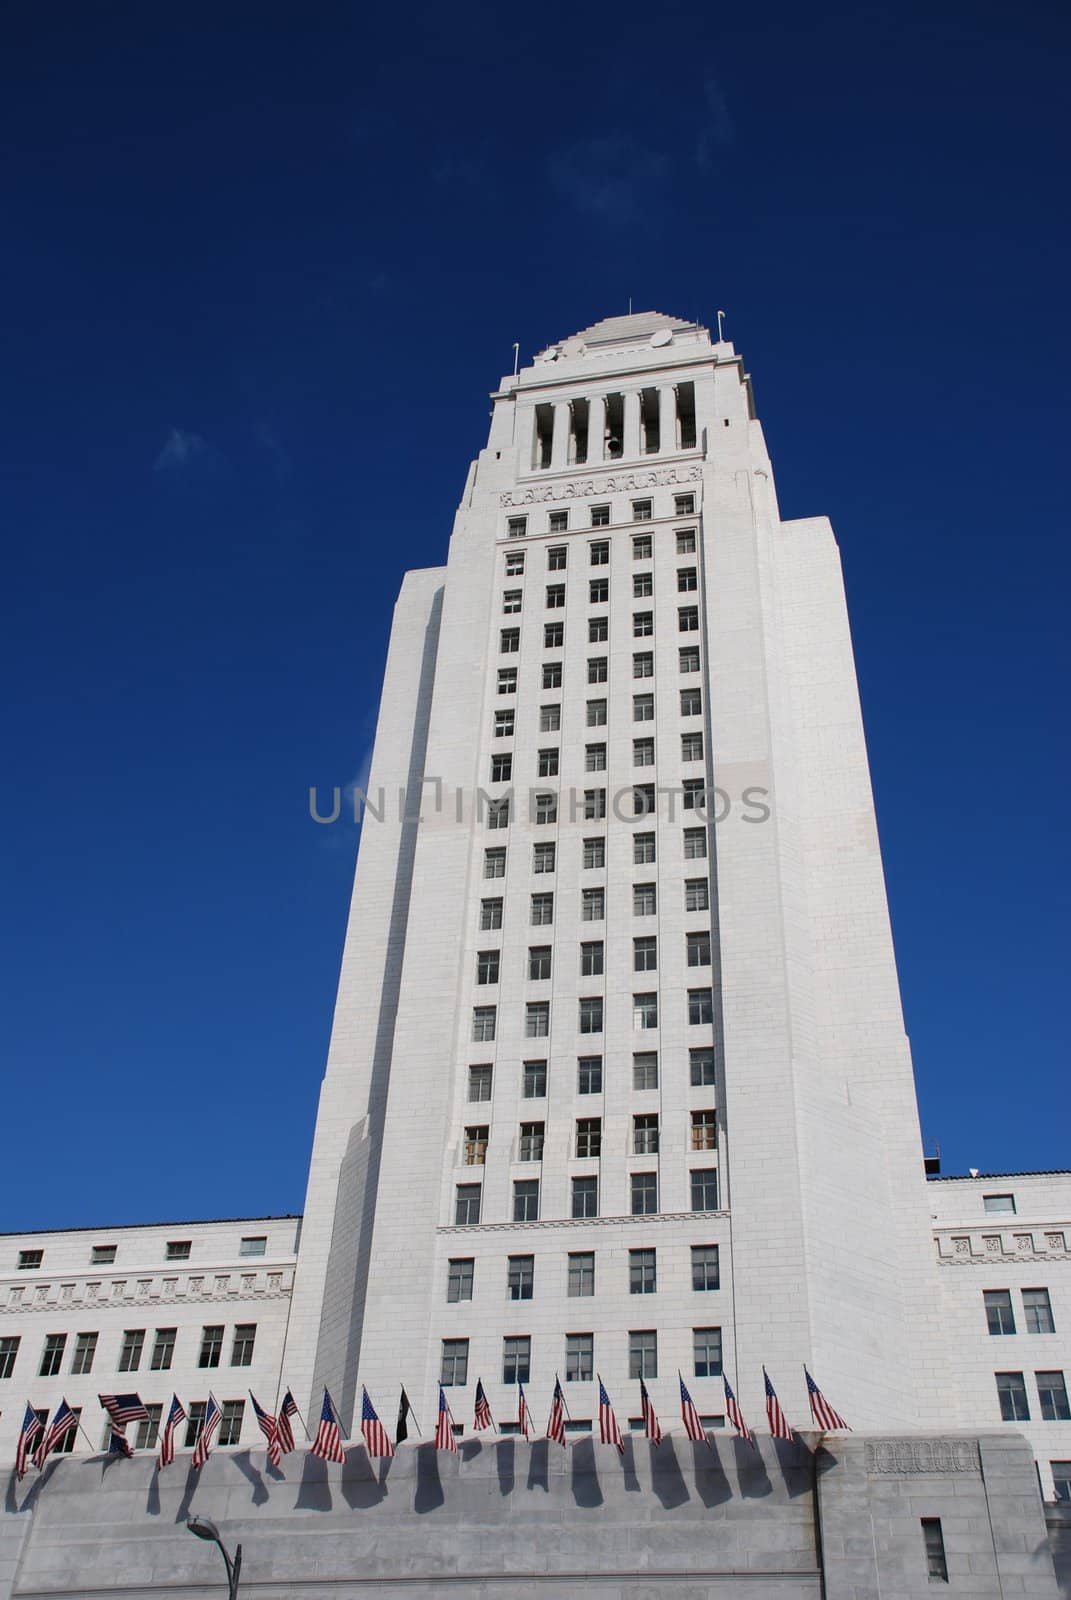 Los Angeles City Hall Tower by pixelsnap